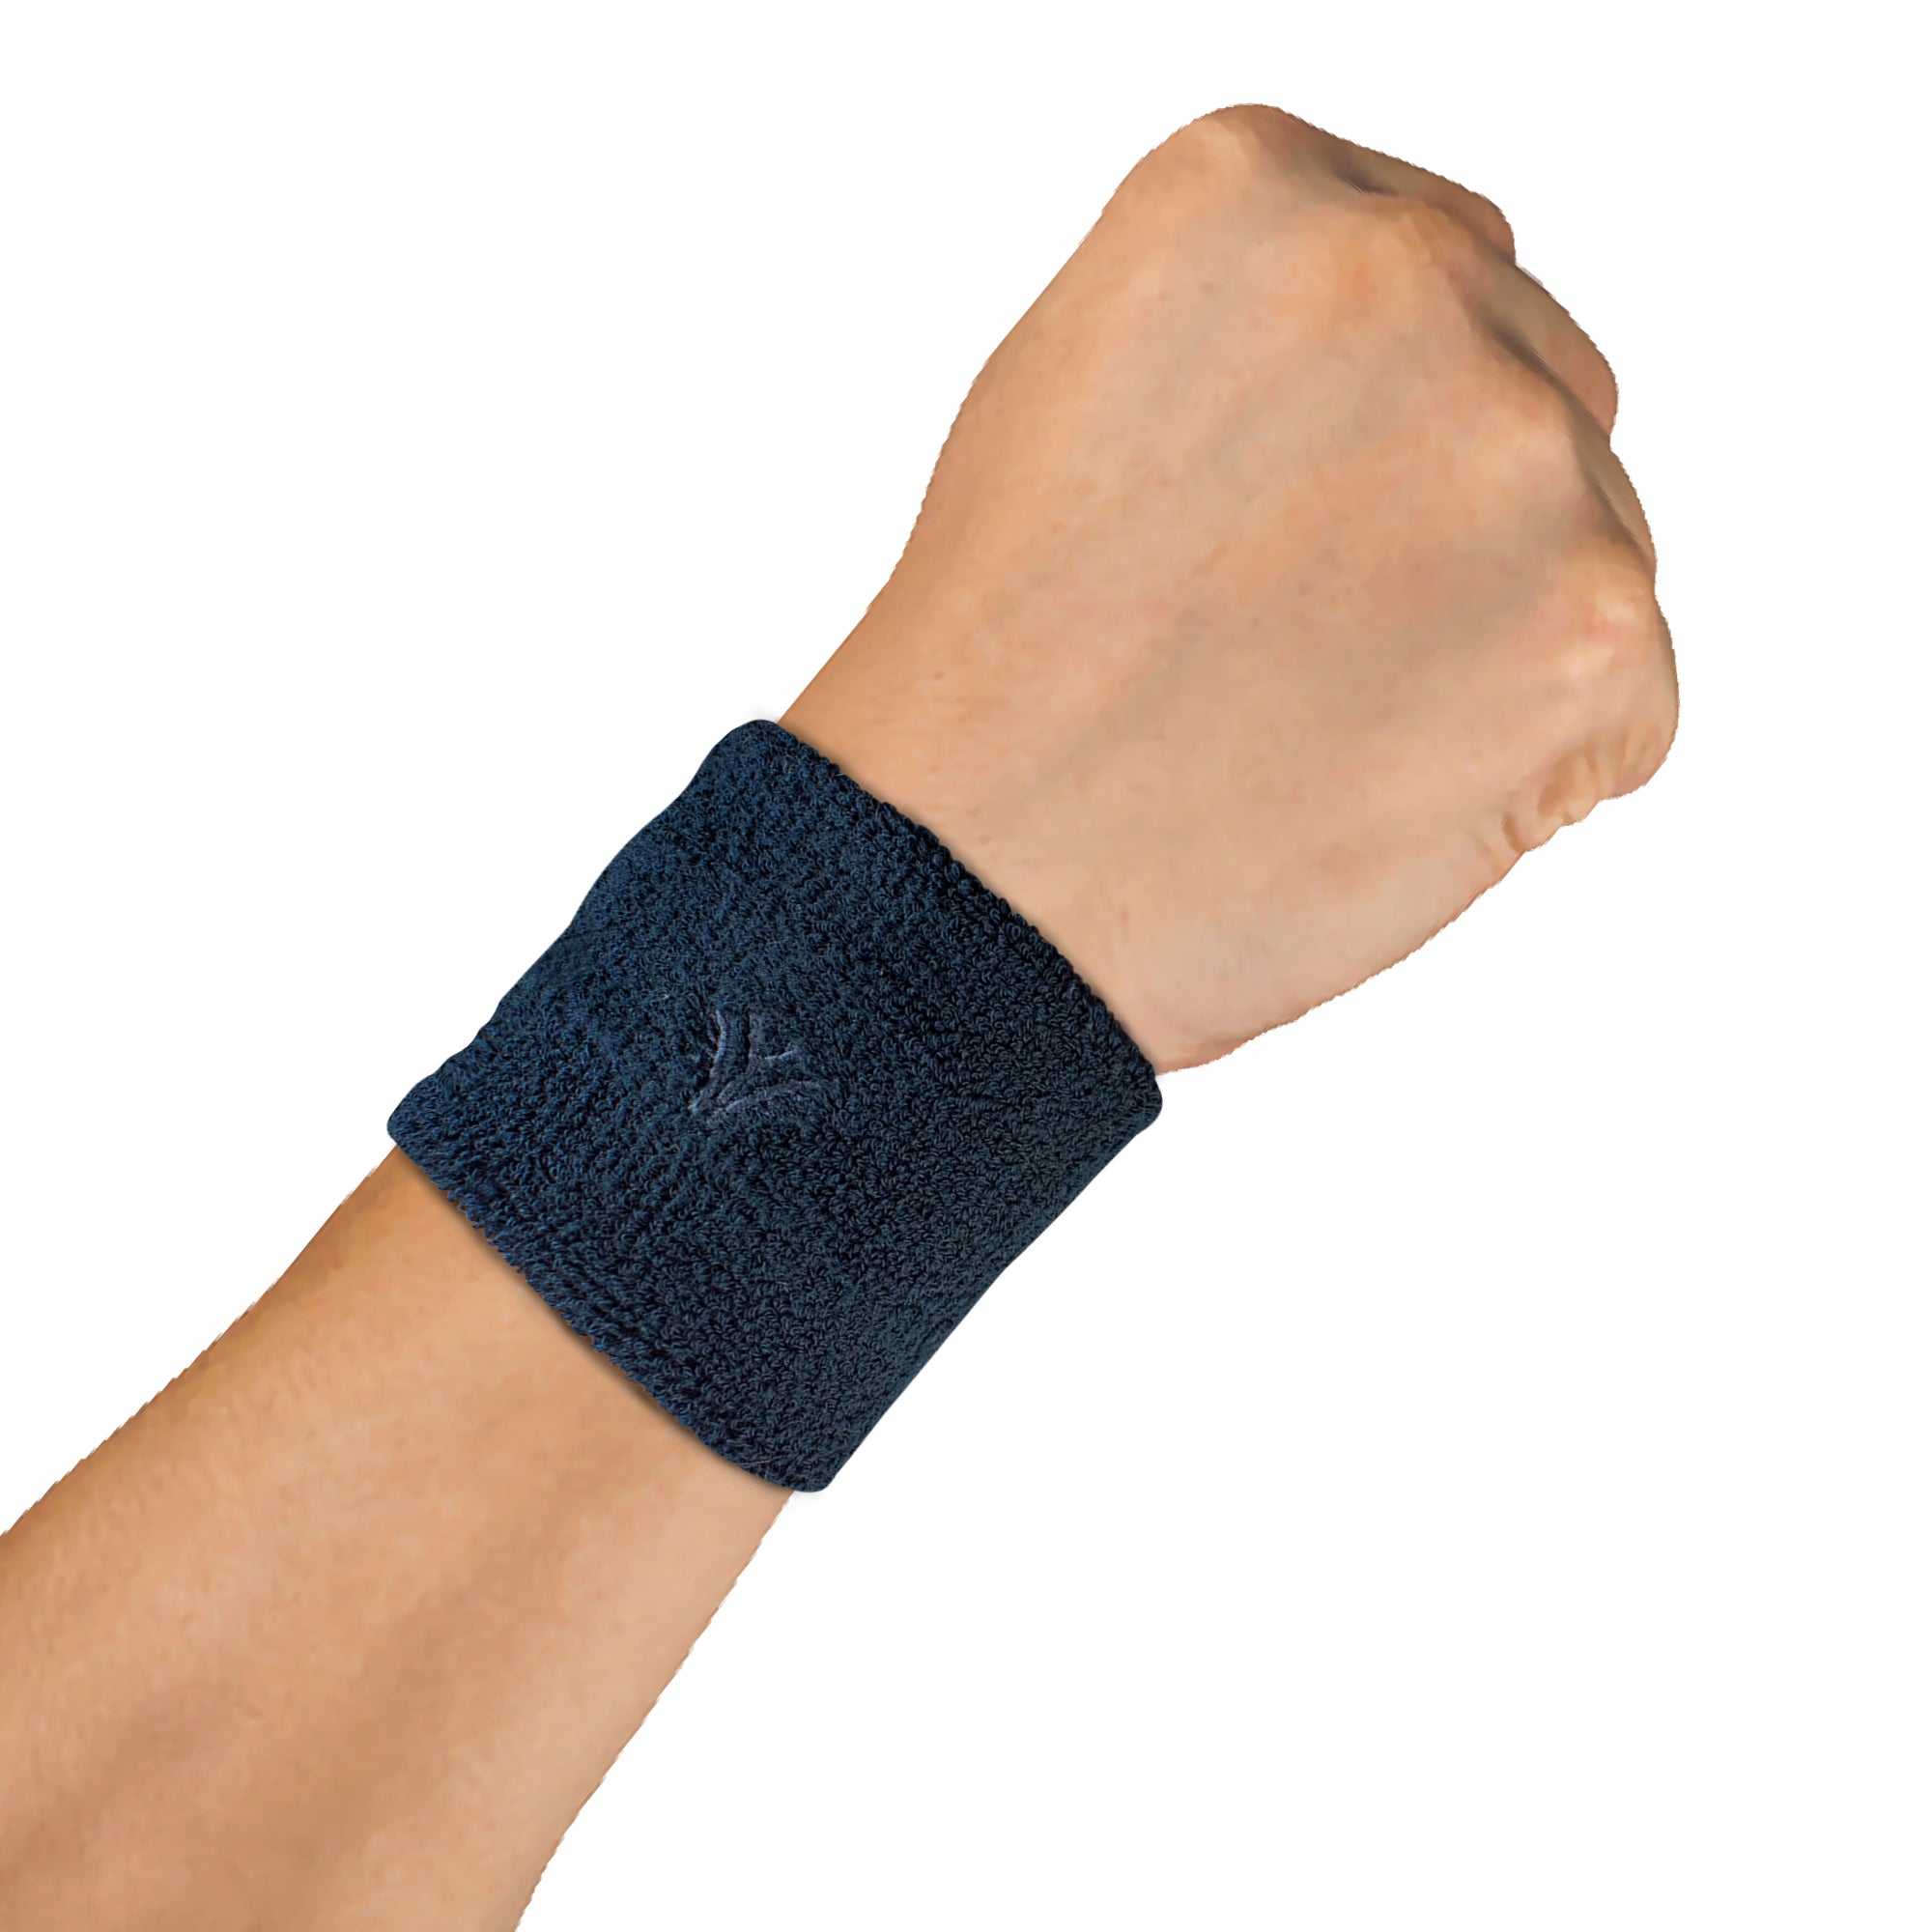 Cotton Wrist Band with Antibacterial and Moisture Wicking (Unisex) - Pack  of 2 Pairs - Black/Navy / FREE SIZE